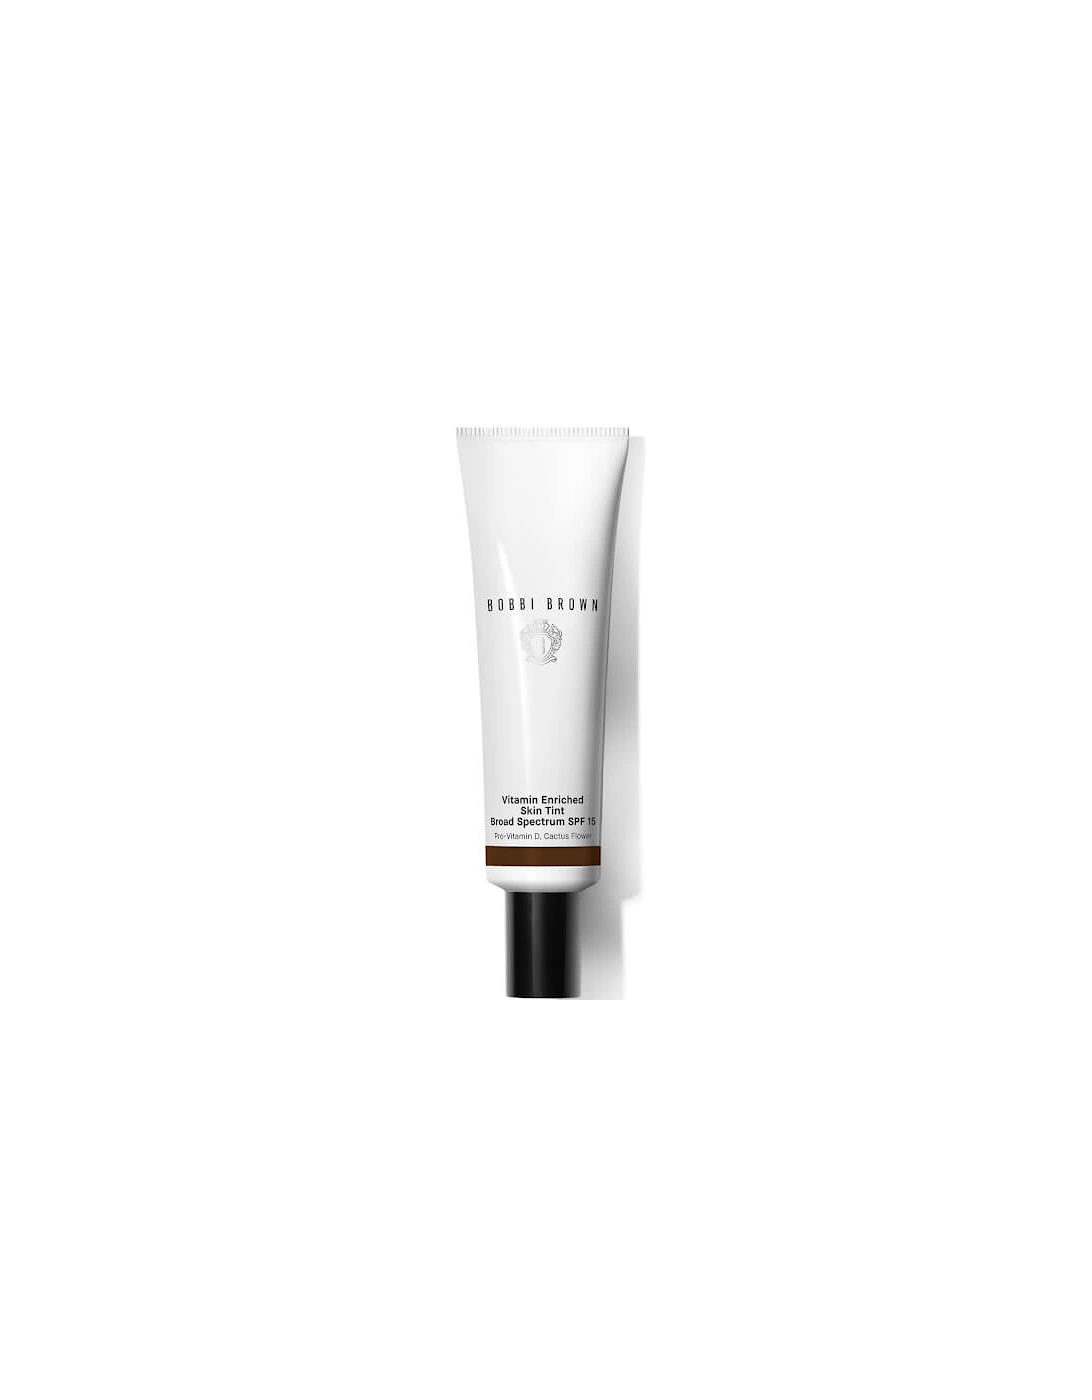 Vitamin Enriched Skin Tint - Rich 4, 2 of 1